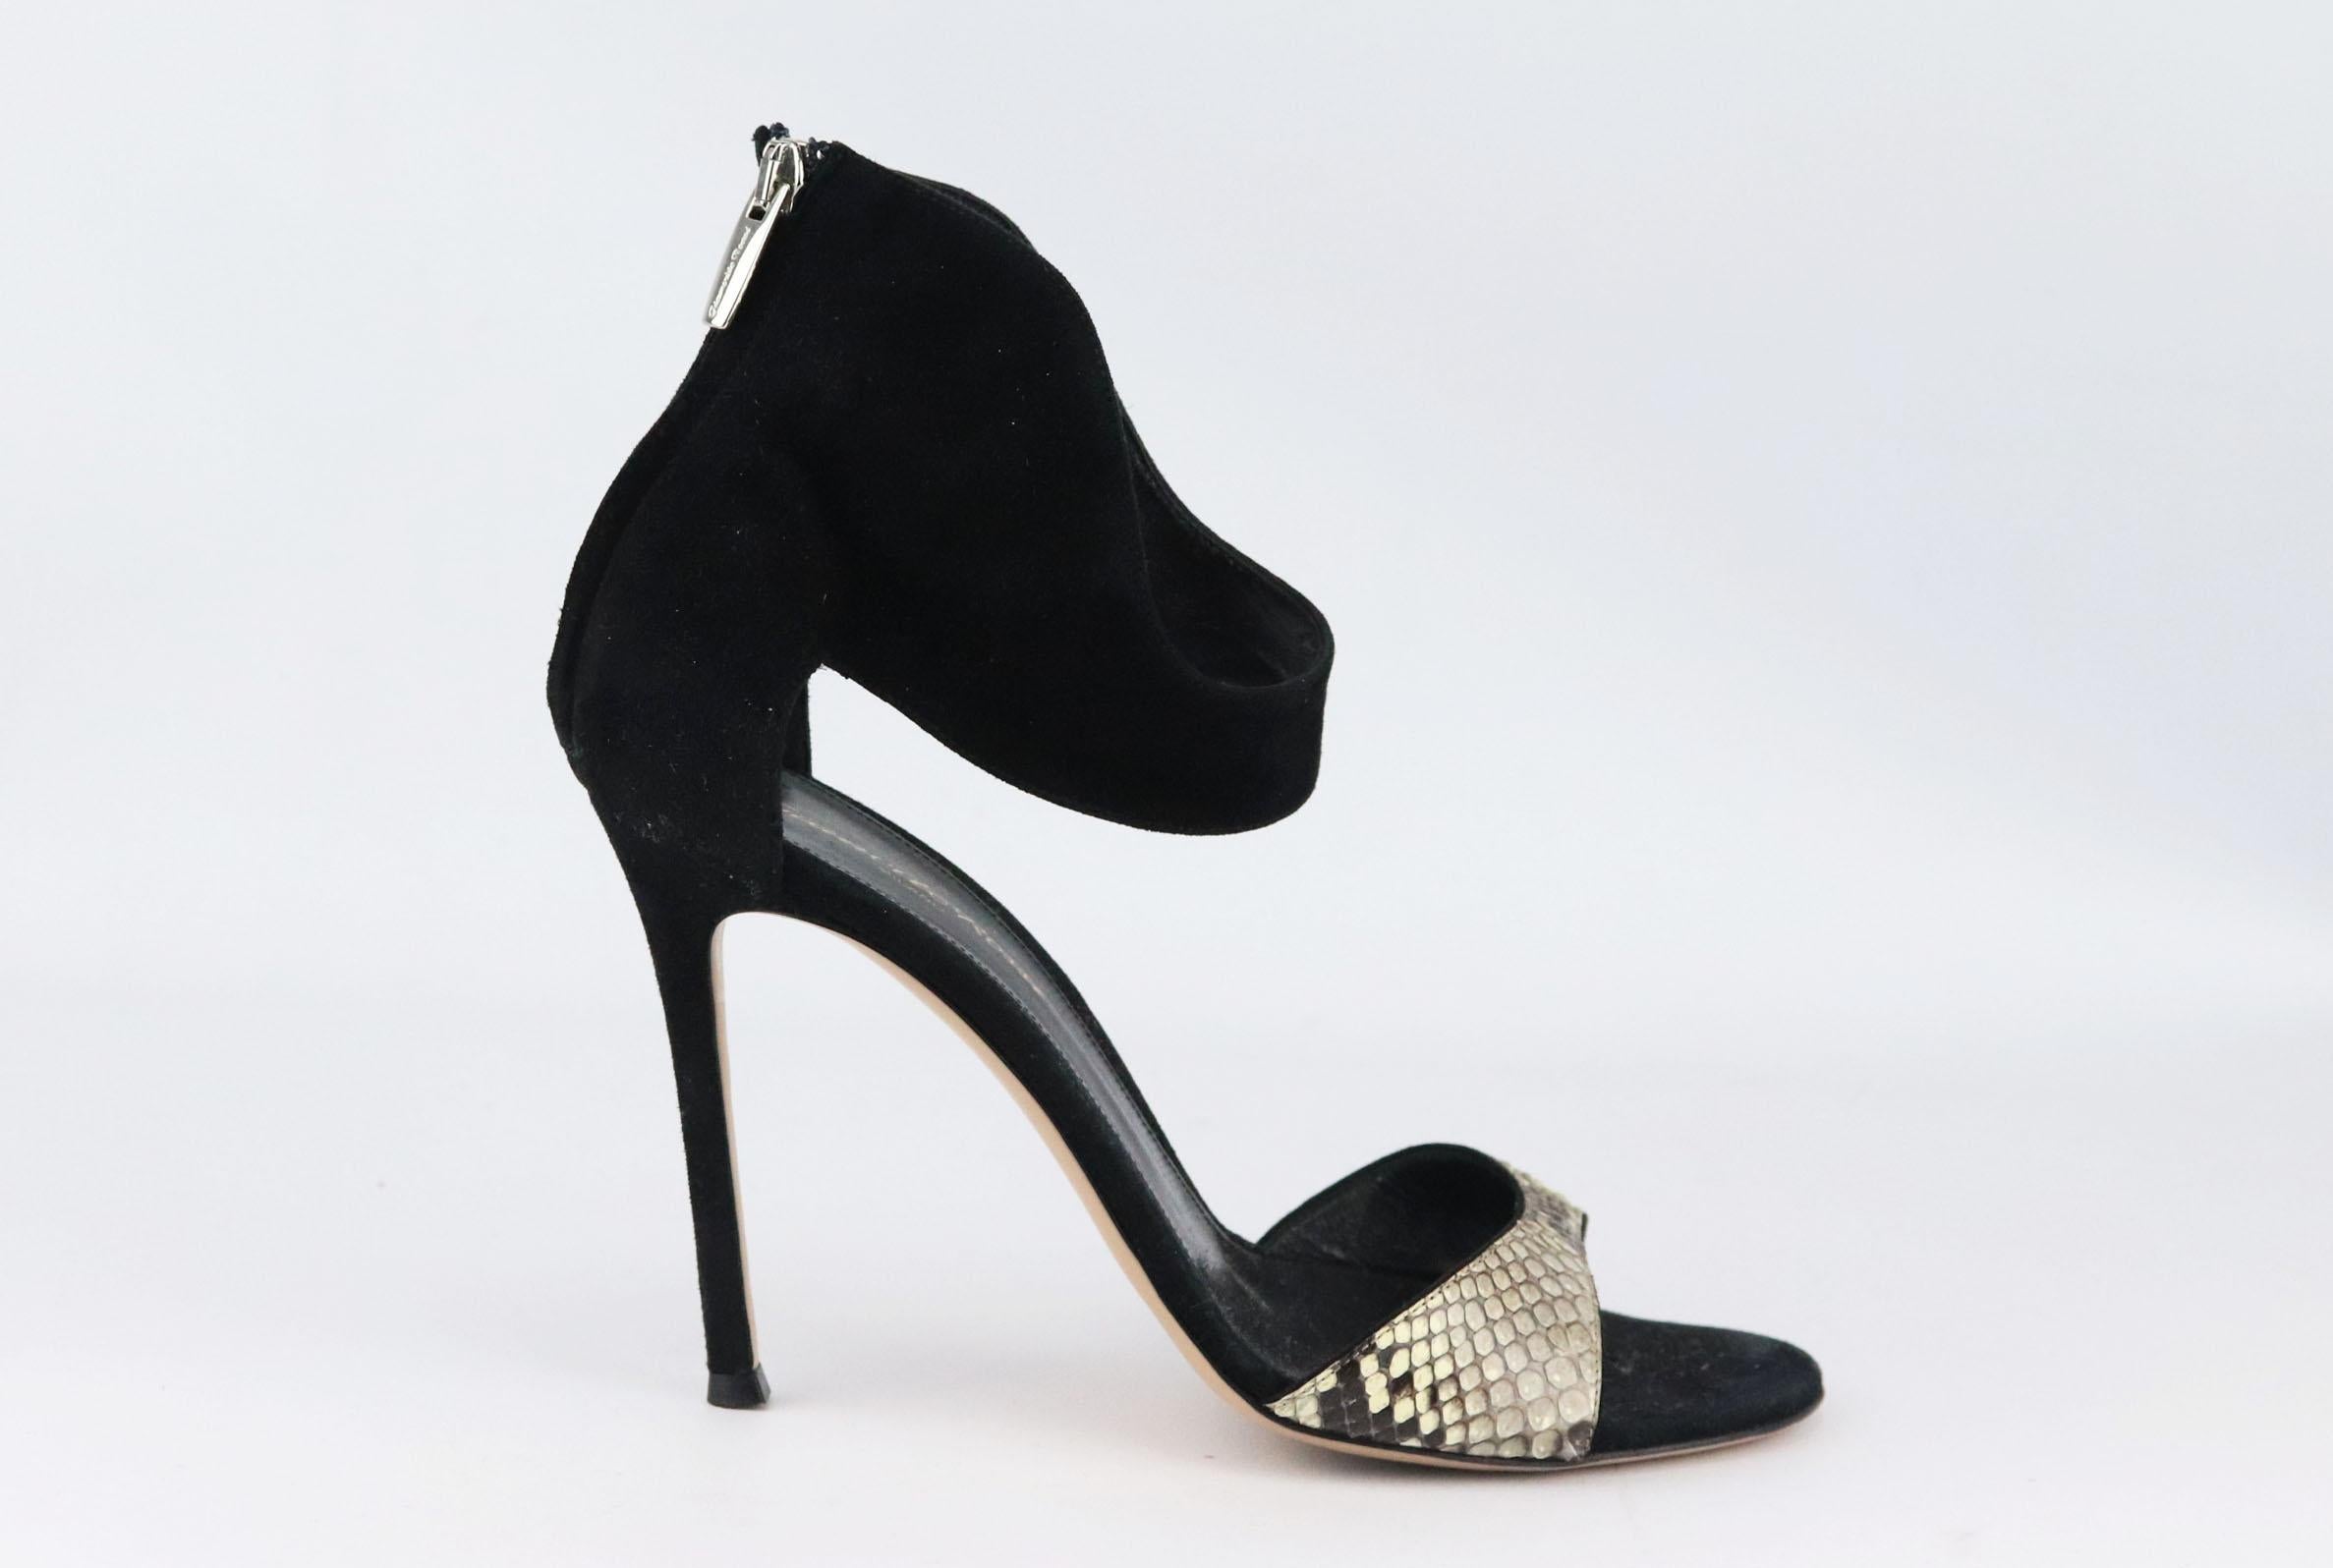 Gianvito Rossi's sandals have been hand-finished in Italy from sumptuous black suede and grey python, this versatile pair has two straps that elegantly frame your ankle and toes.
Heel measures approximately 89 mm/ 3.5 inch.
Black suede, grey